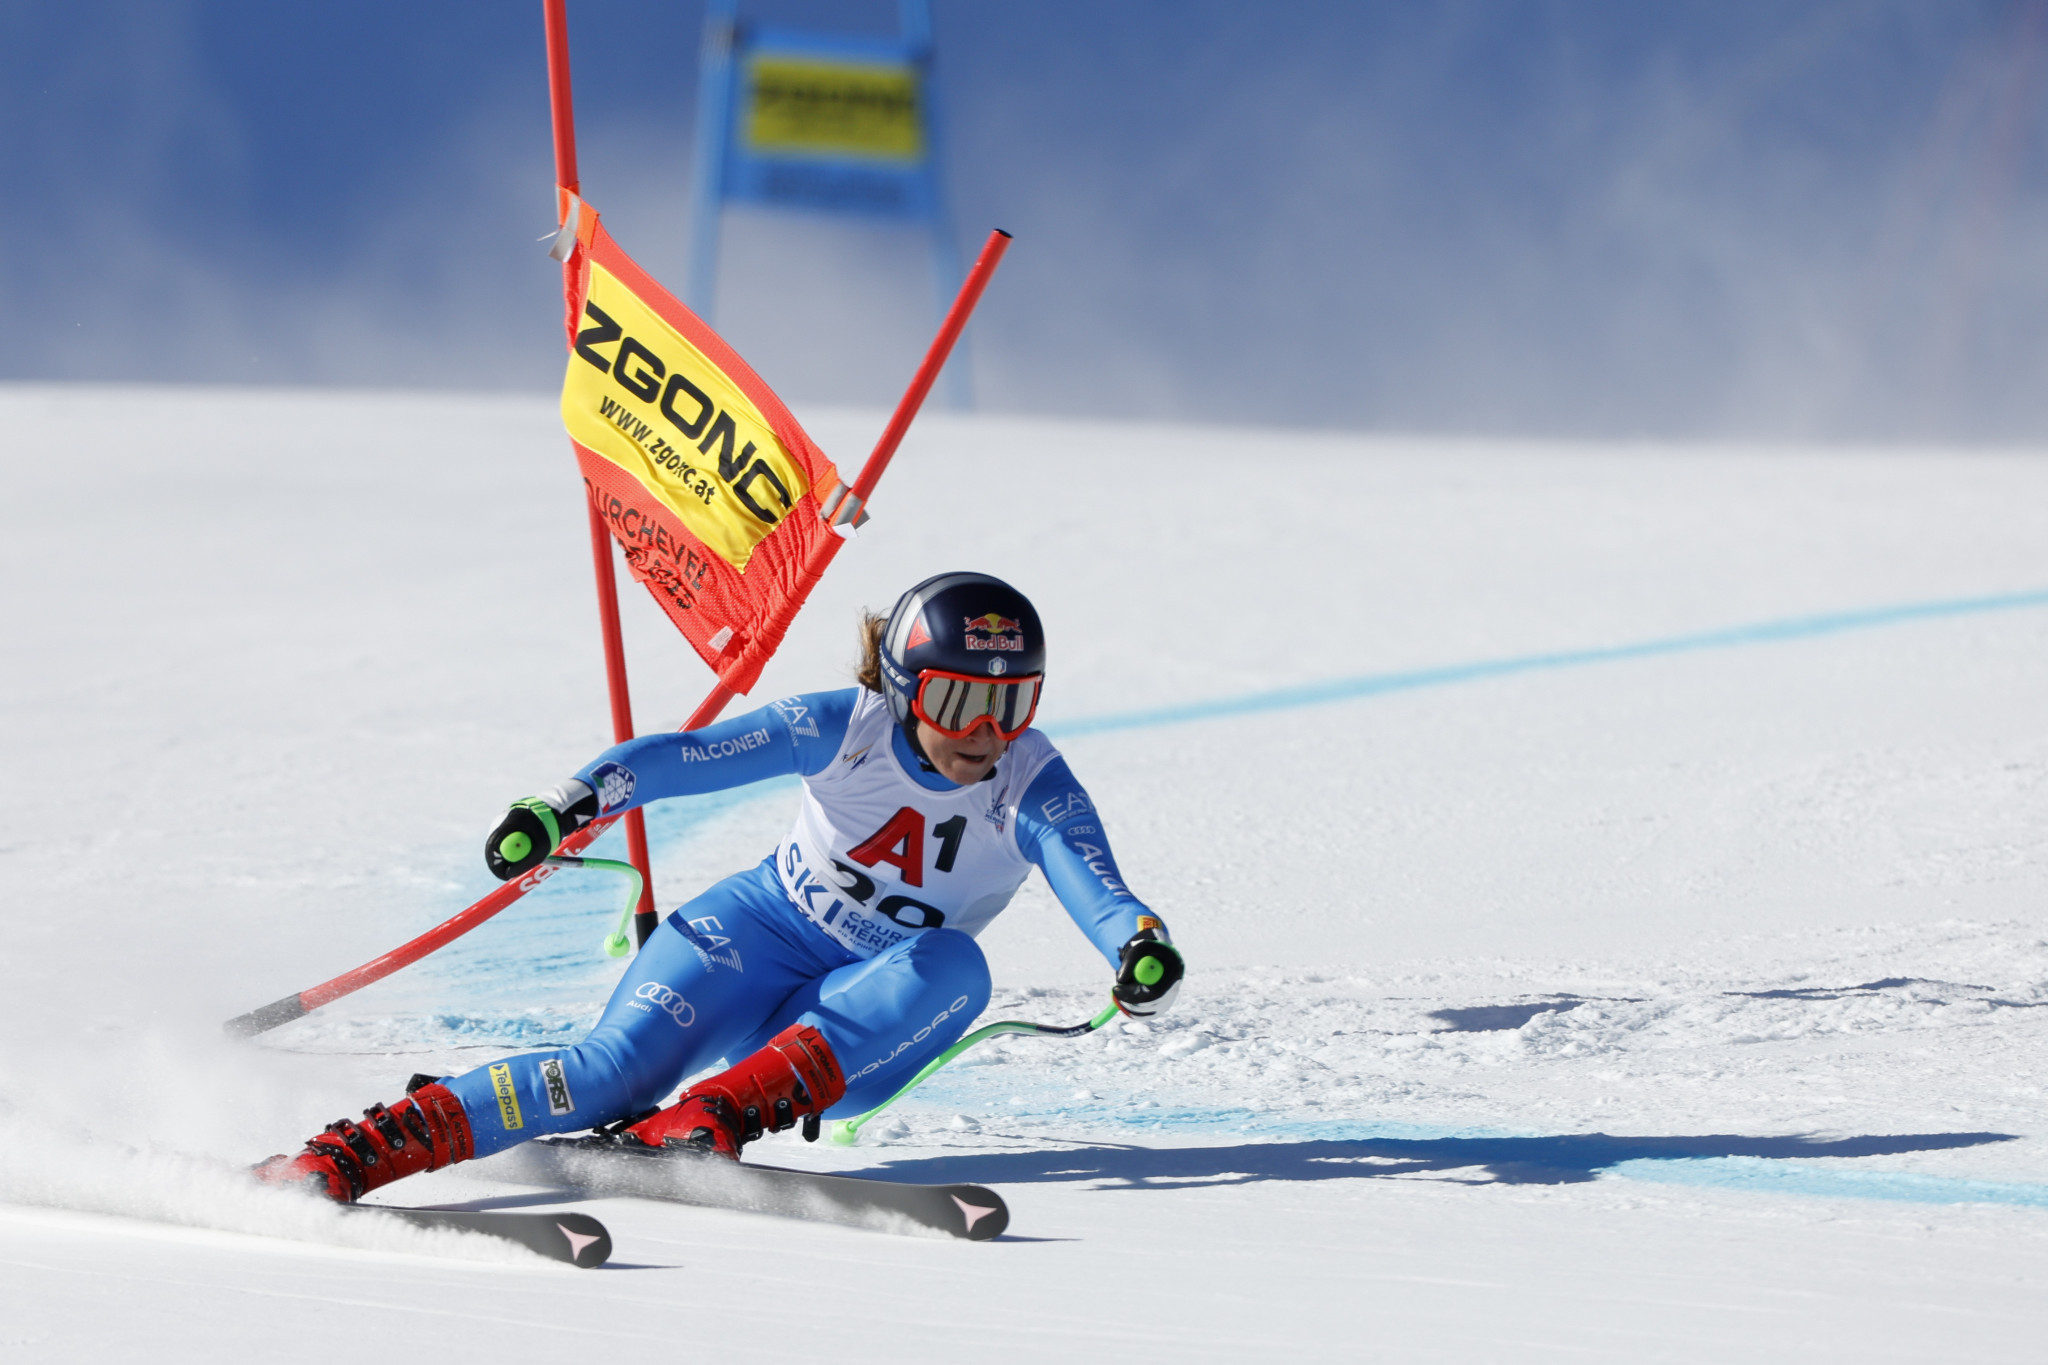 Downhill favourite Sofia Goggia of Italy was disqualified for straddling a gate ©Getty Images